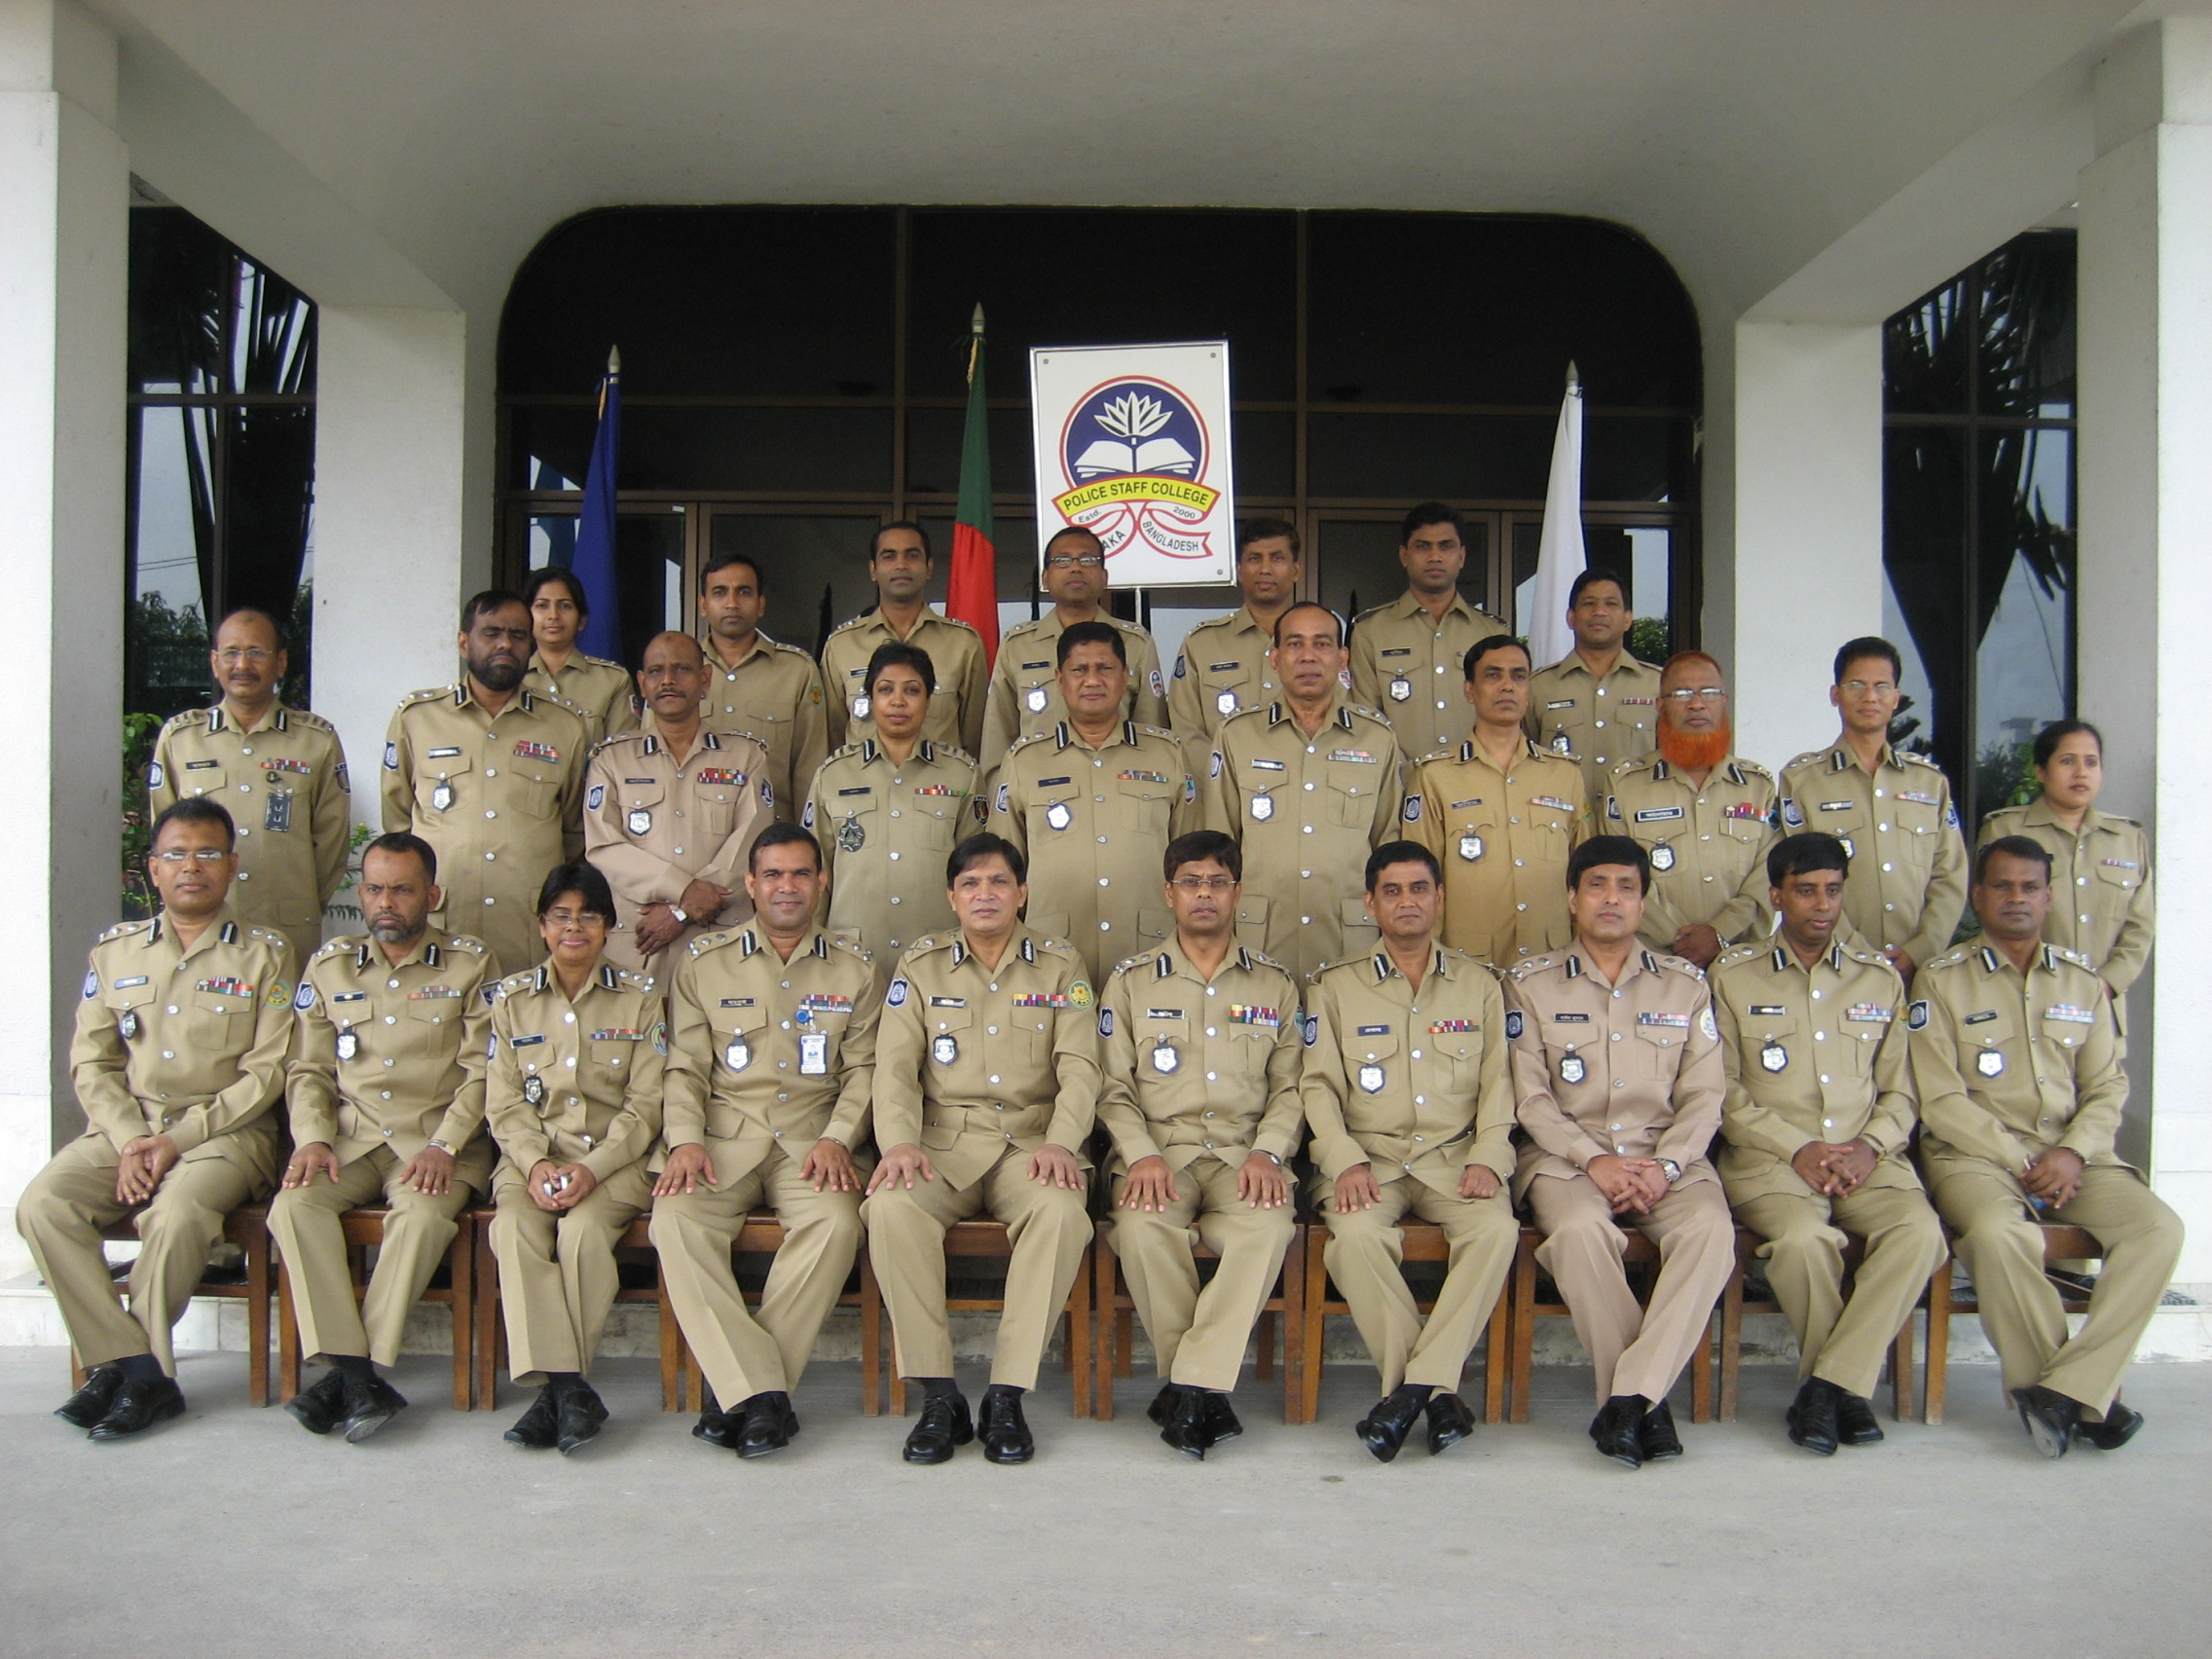 Participant of 2nd Police Executive Development course.